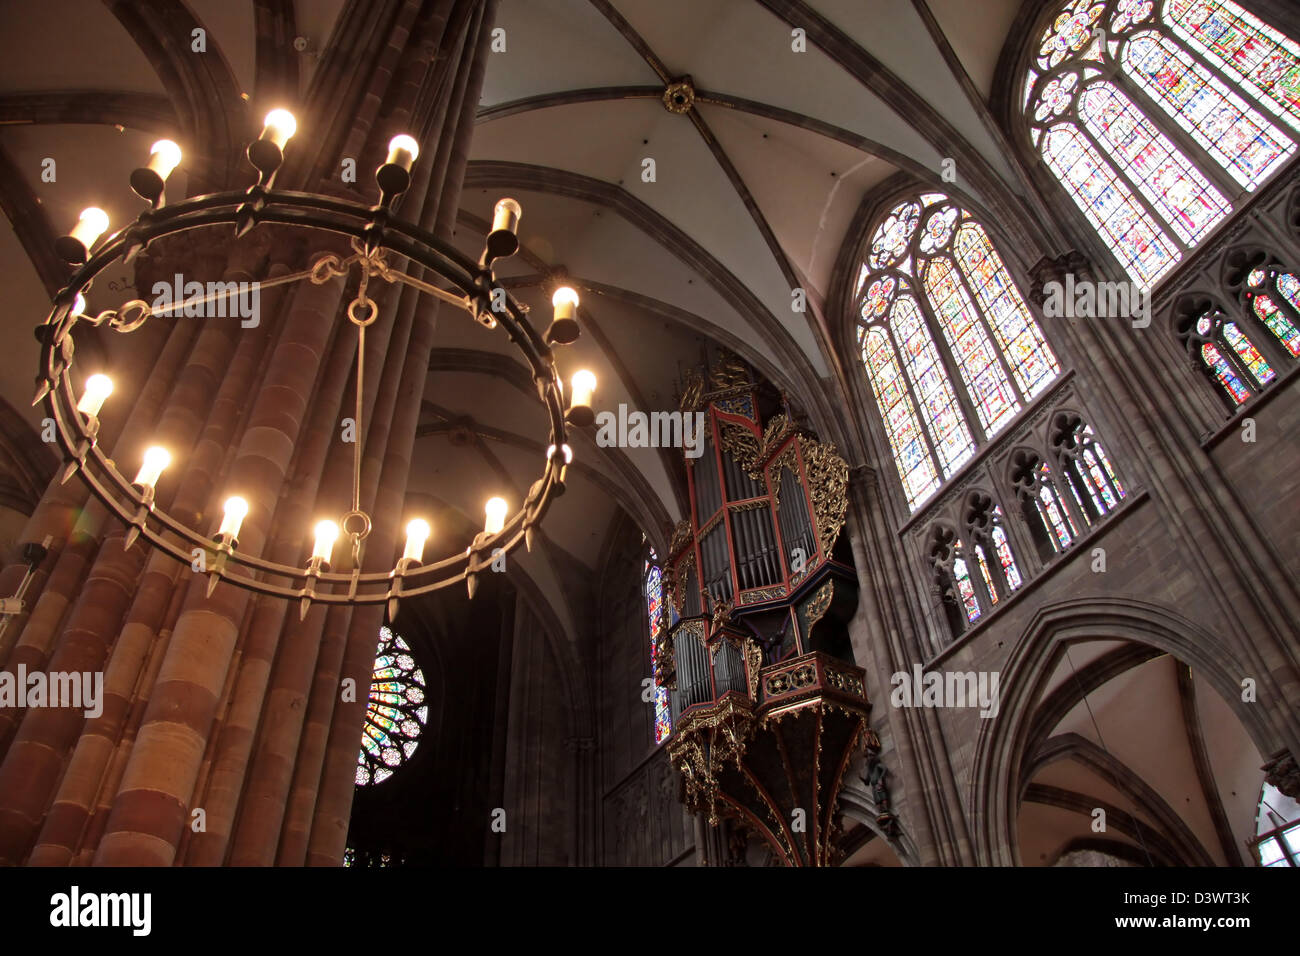 Round candleholder of Strasbourg cathedral in Strasbourg, Alsace, France Stock Photo